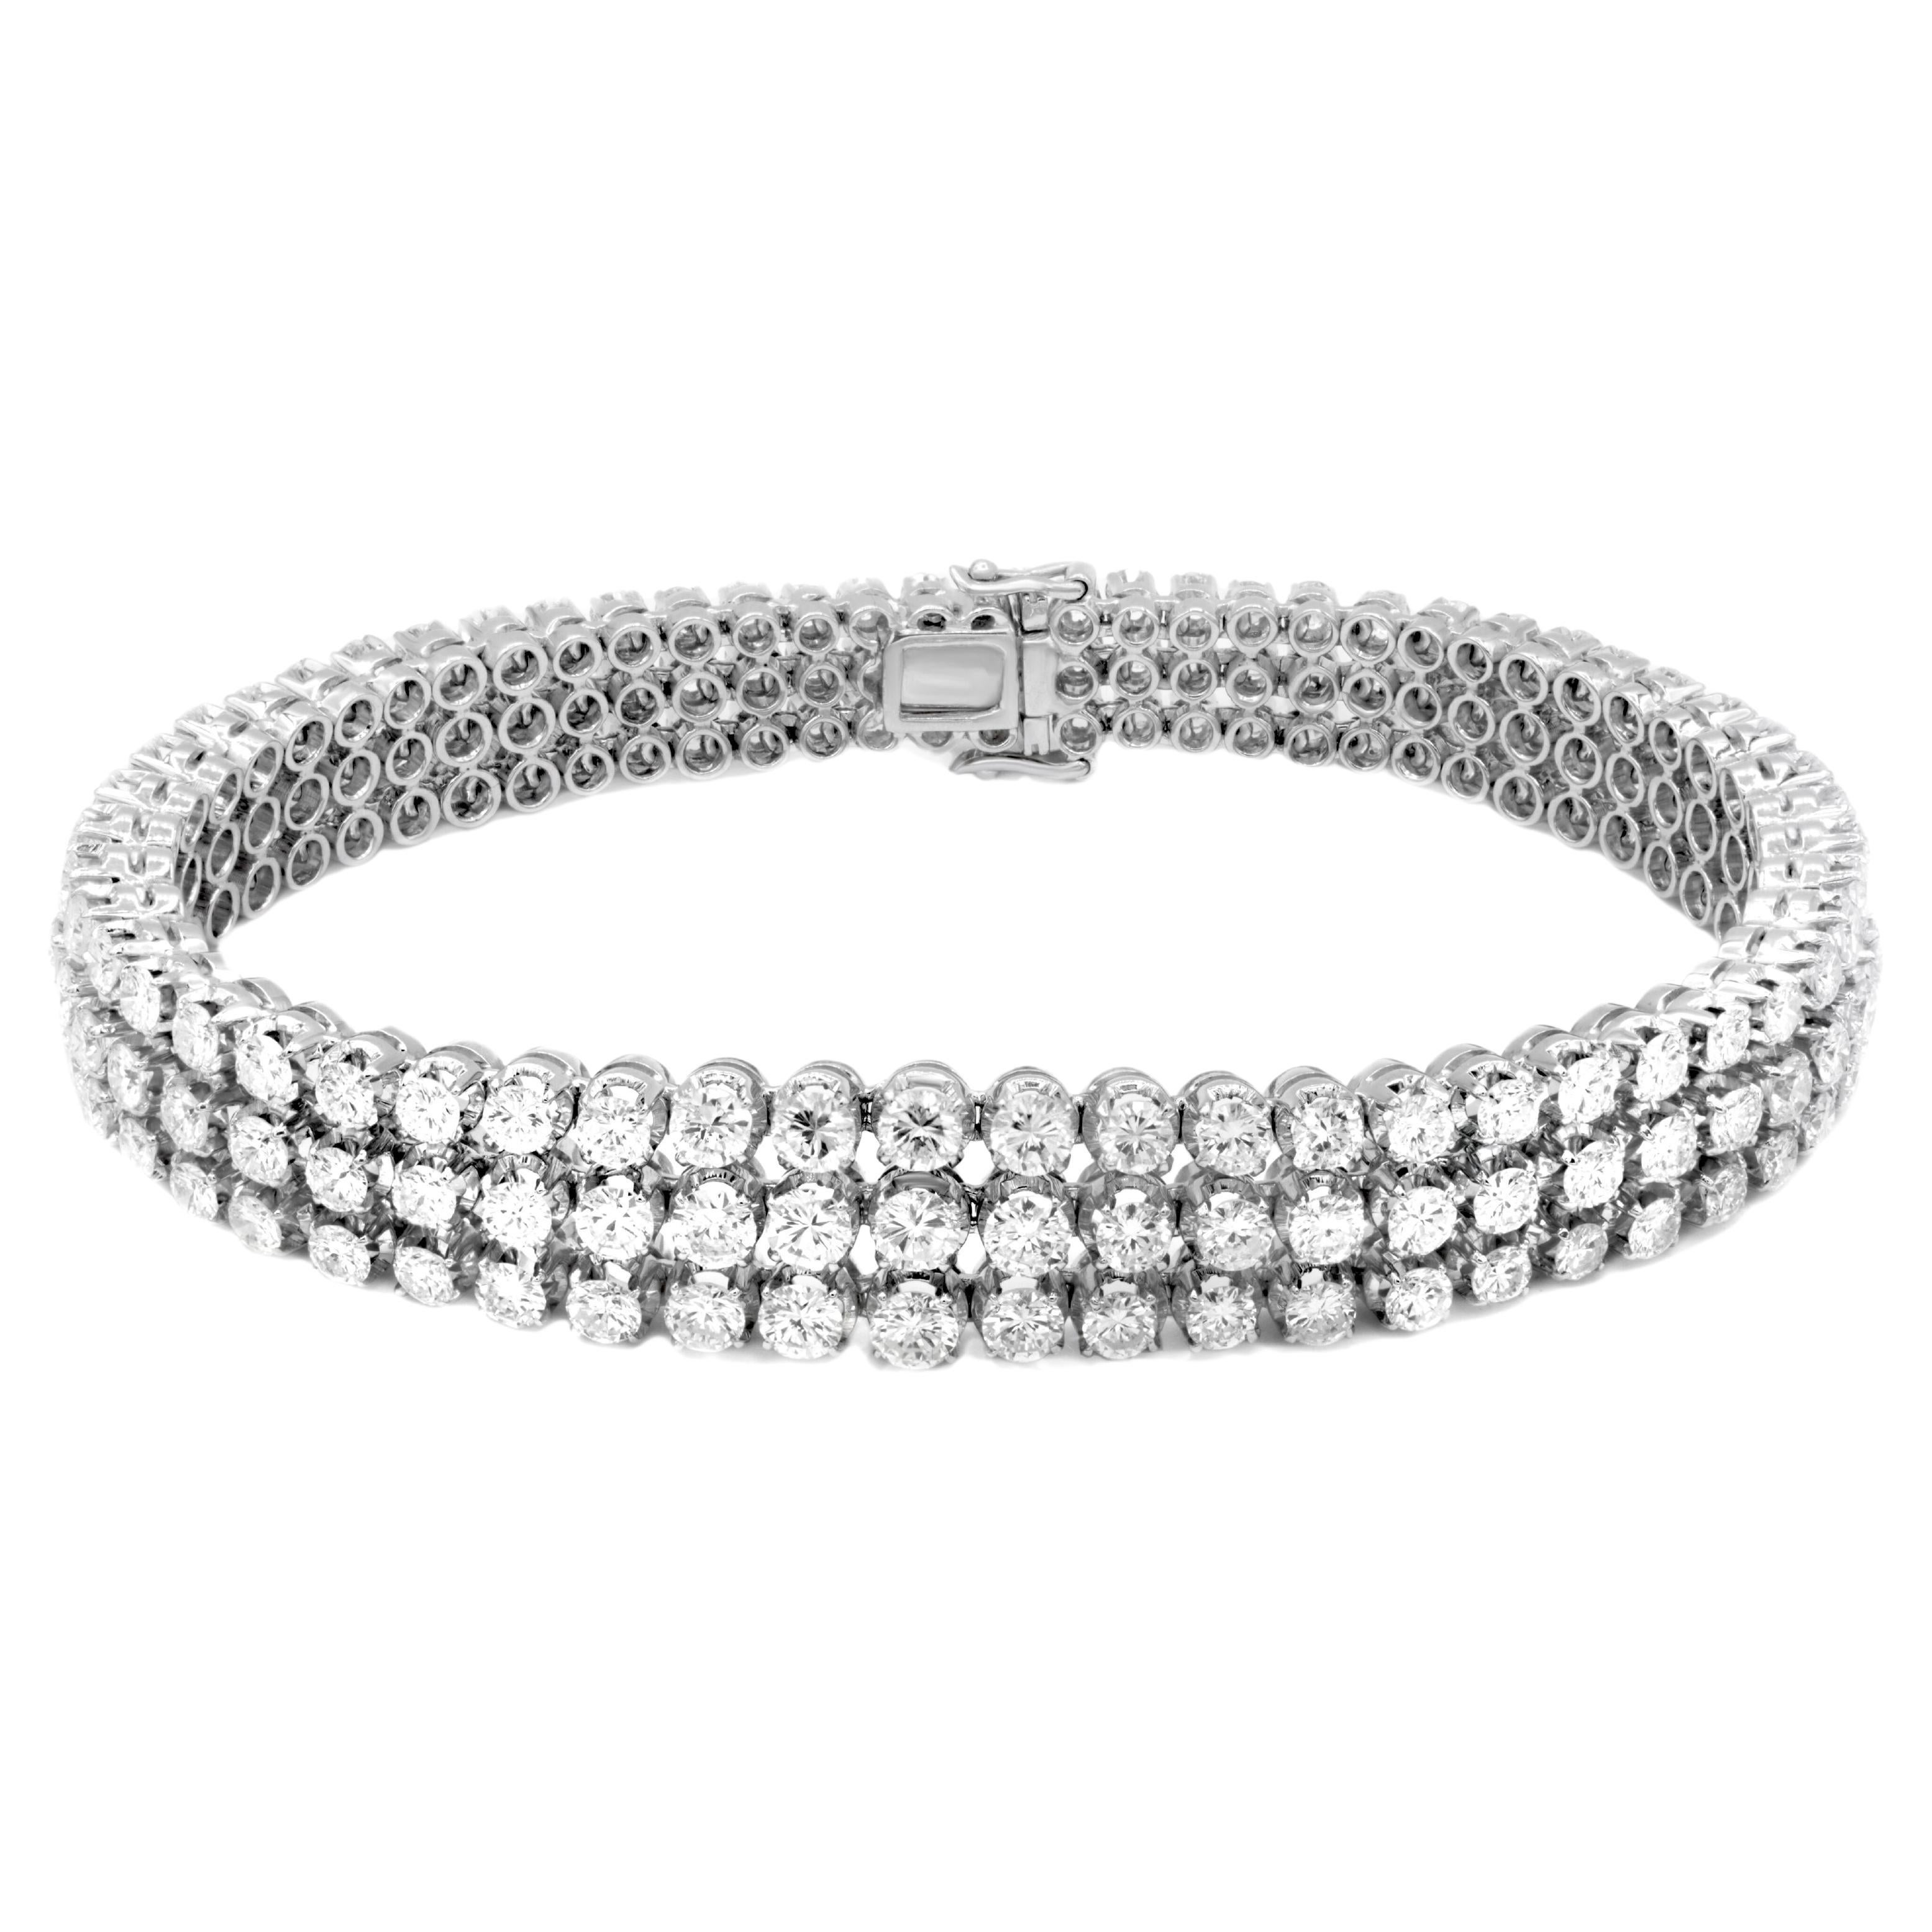 Diana M. 18kt white gold bracelet featuring 3 rows of 9.00 cts of Diamonds 